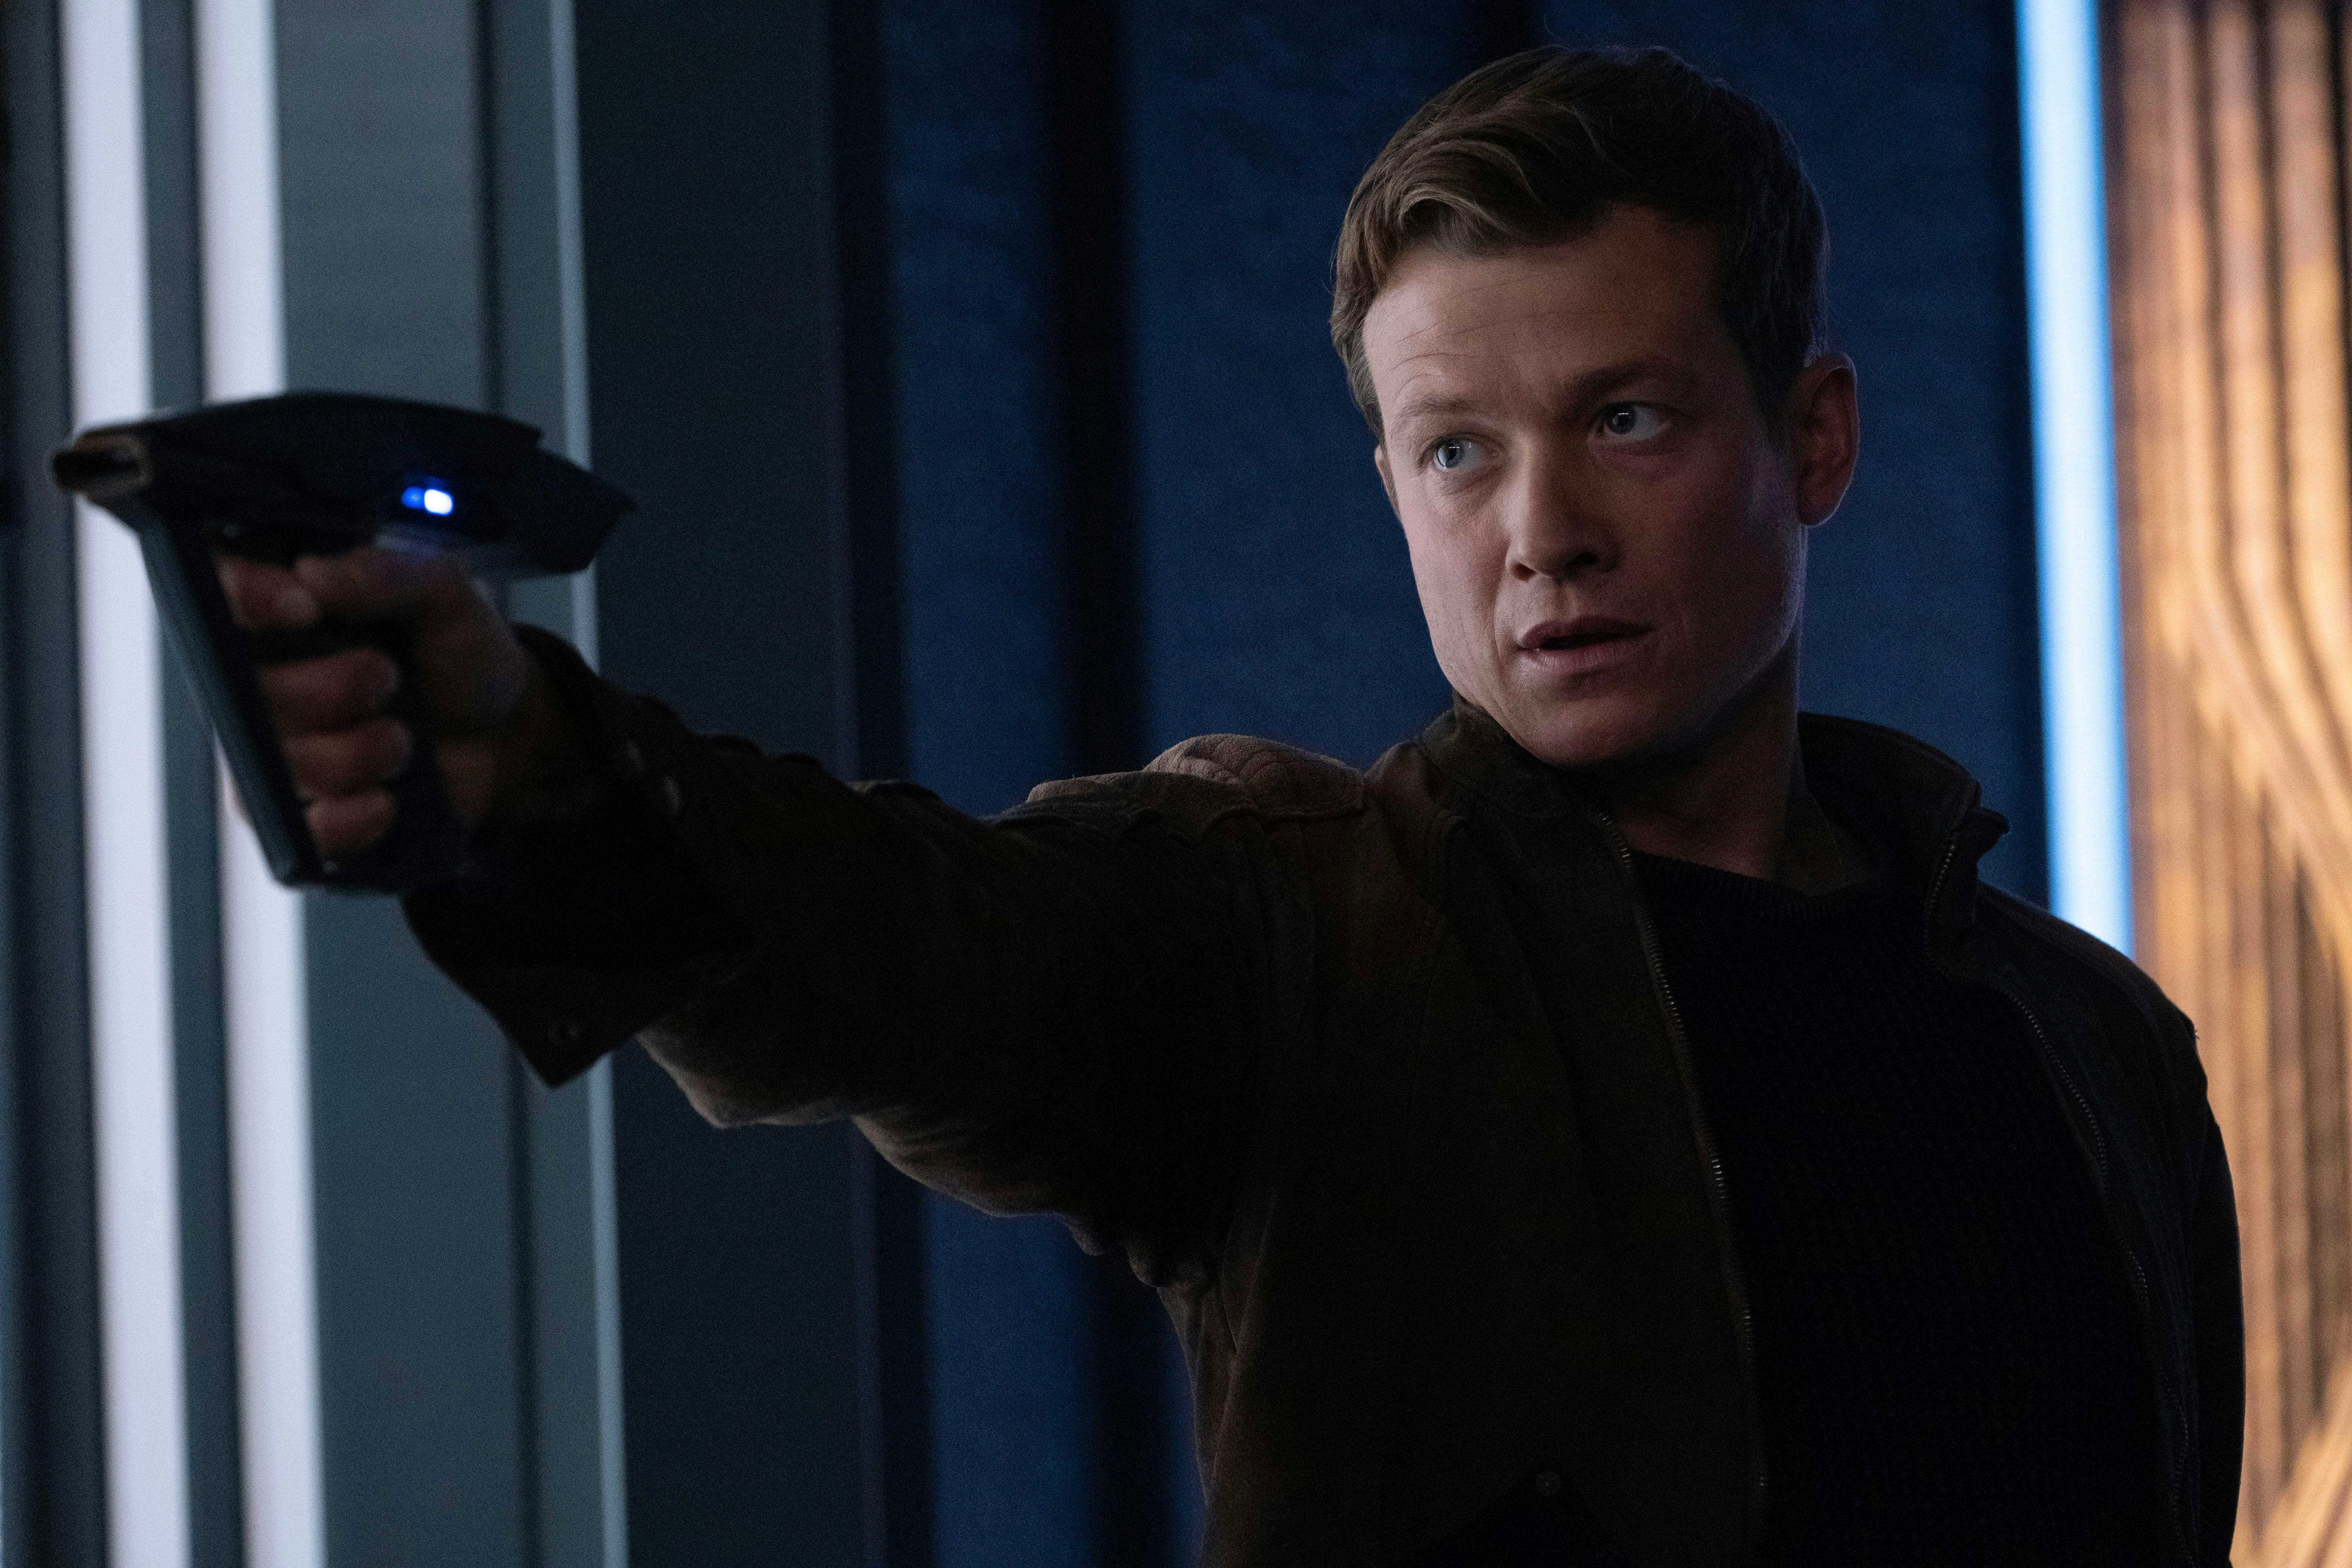 Ed Speleers as Jack stands defensive with his phaser pointed in front of him on Star Trek: Picard